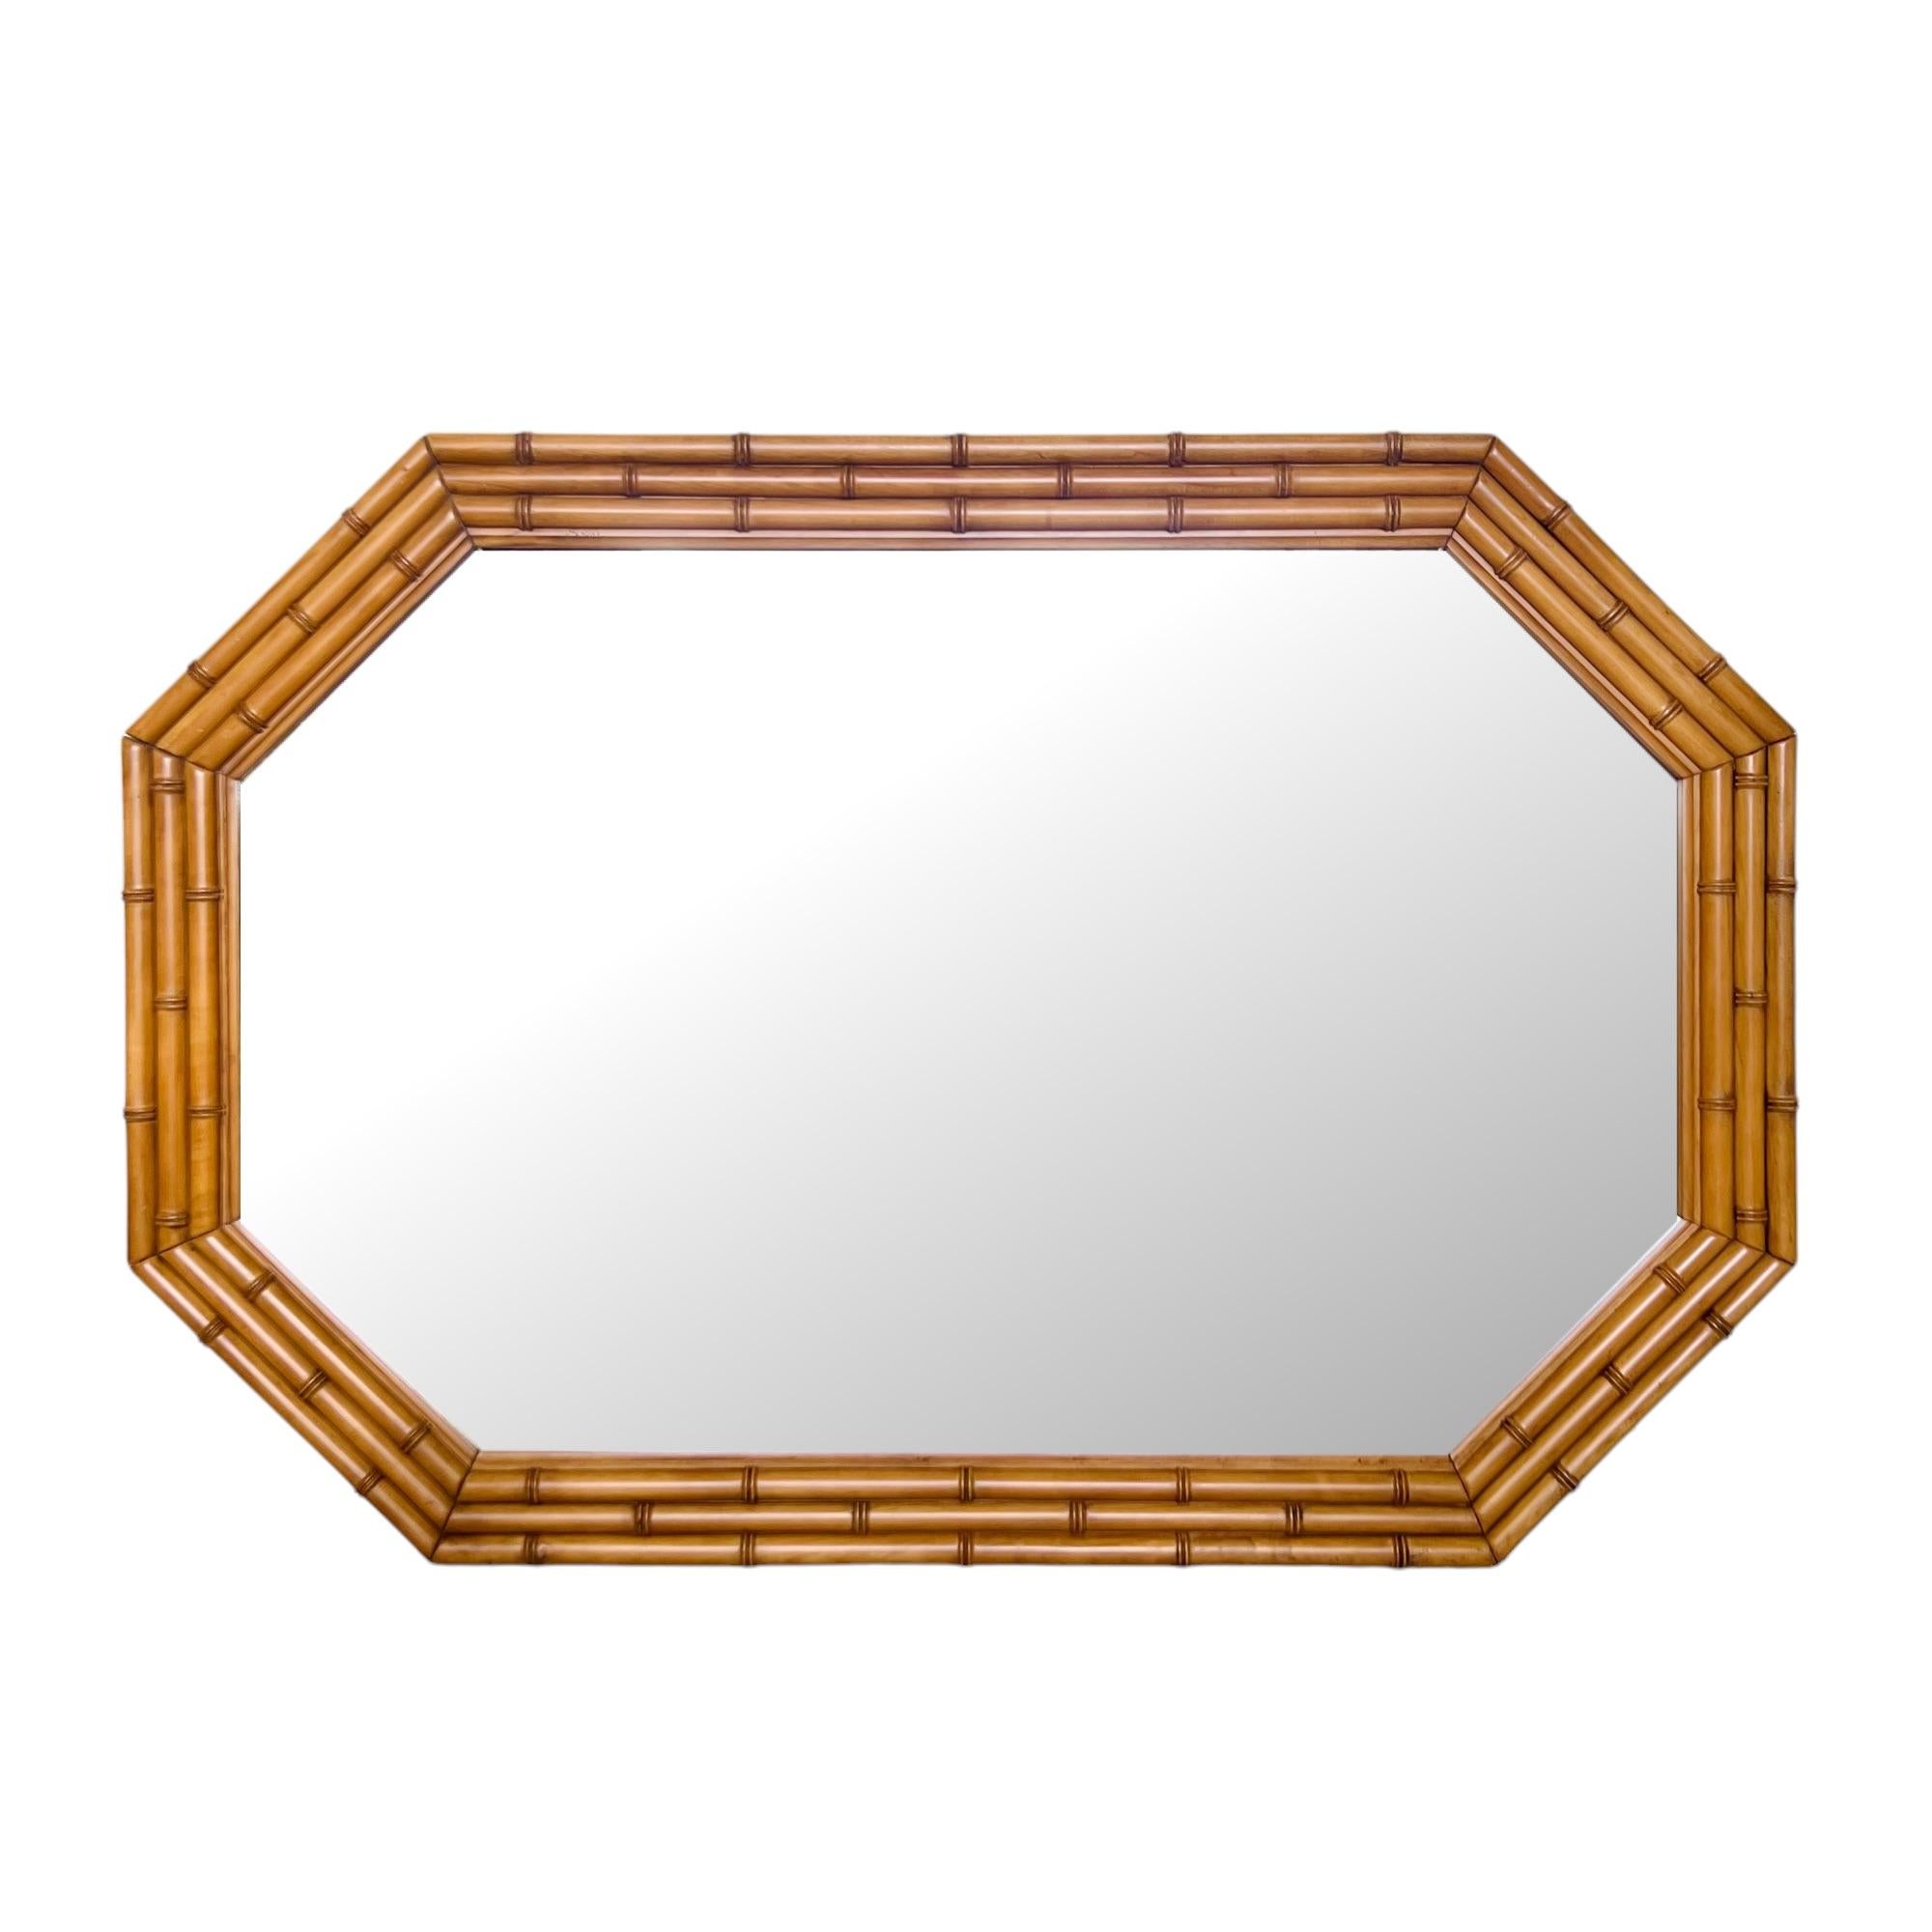 Turned Faux Bamboo Wood Elongated Octagonal Mirror, 1960s